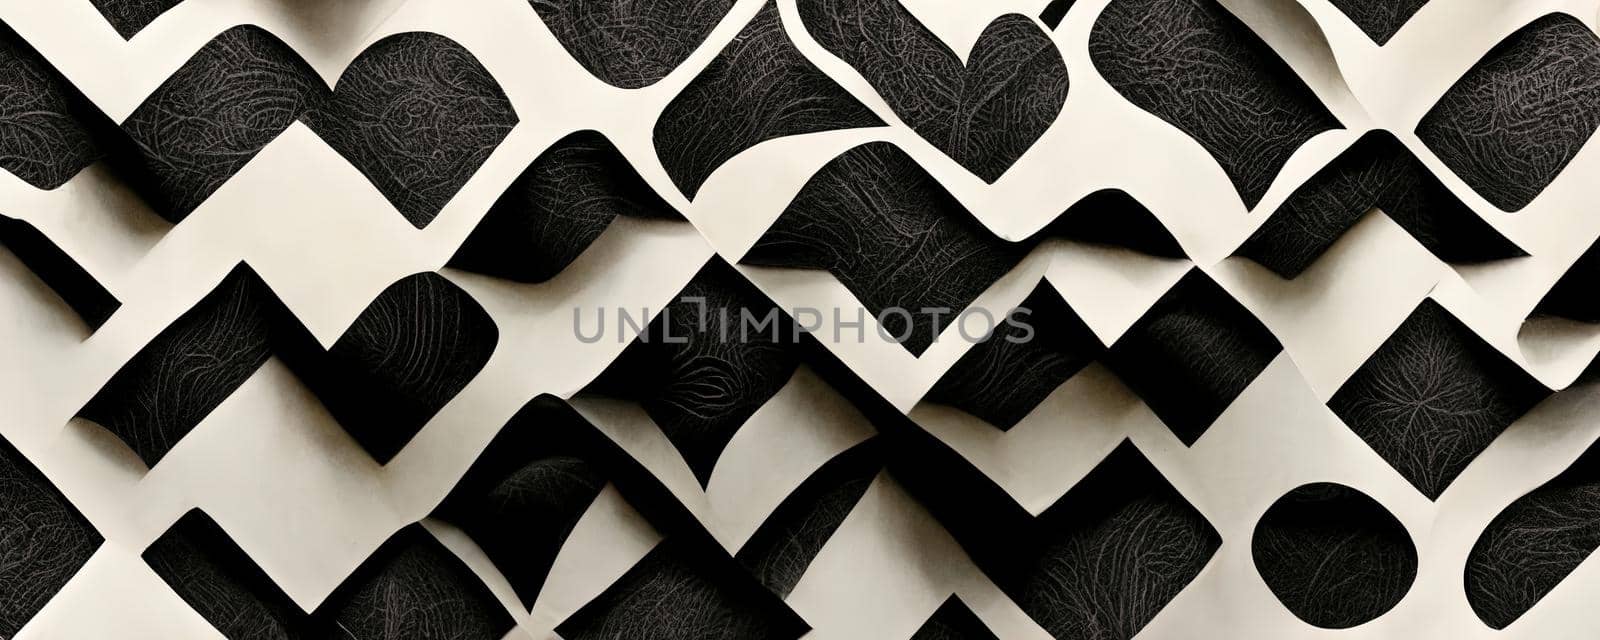 black and white background imitating cut paper.